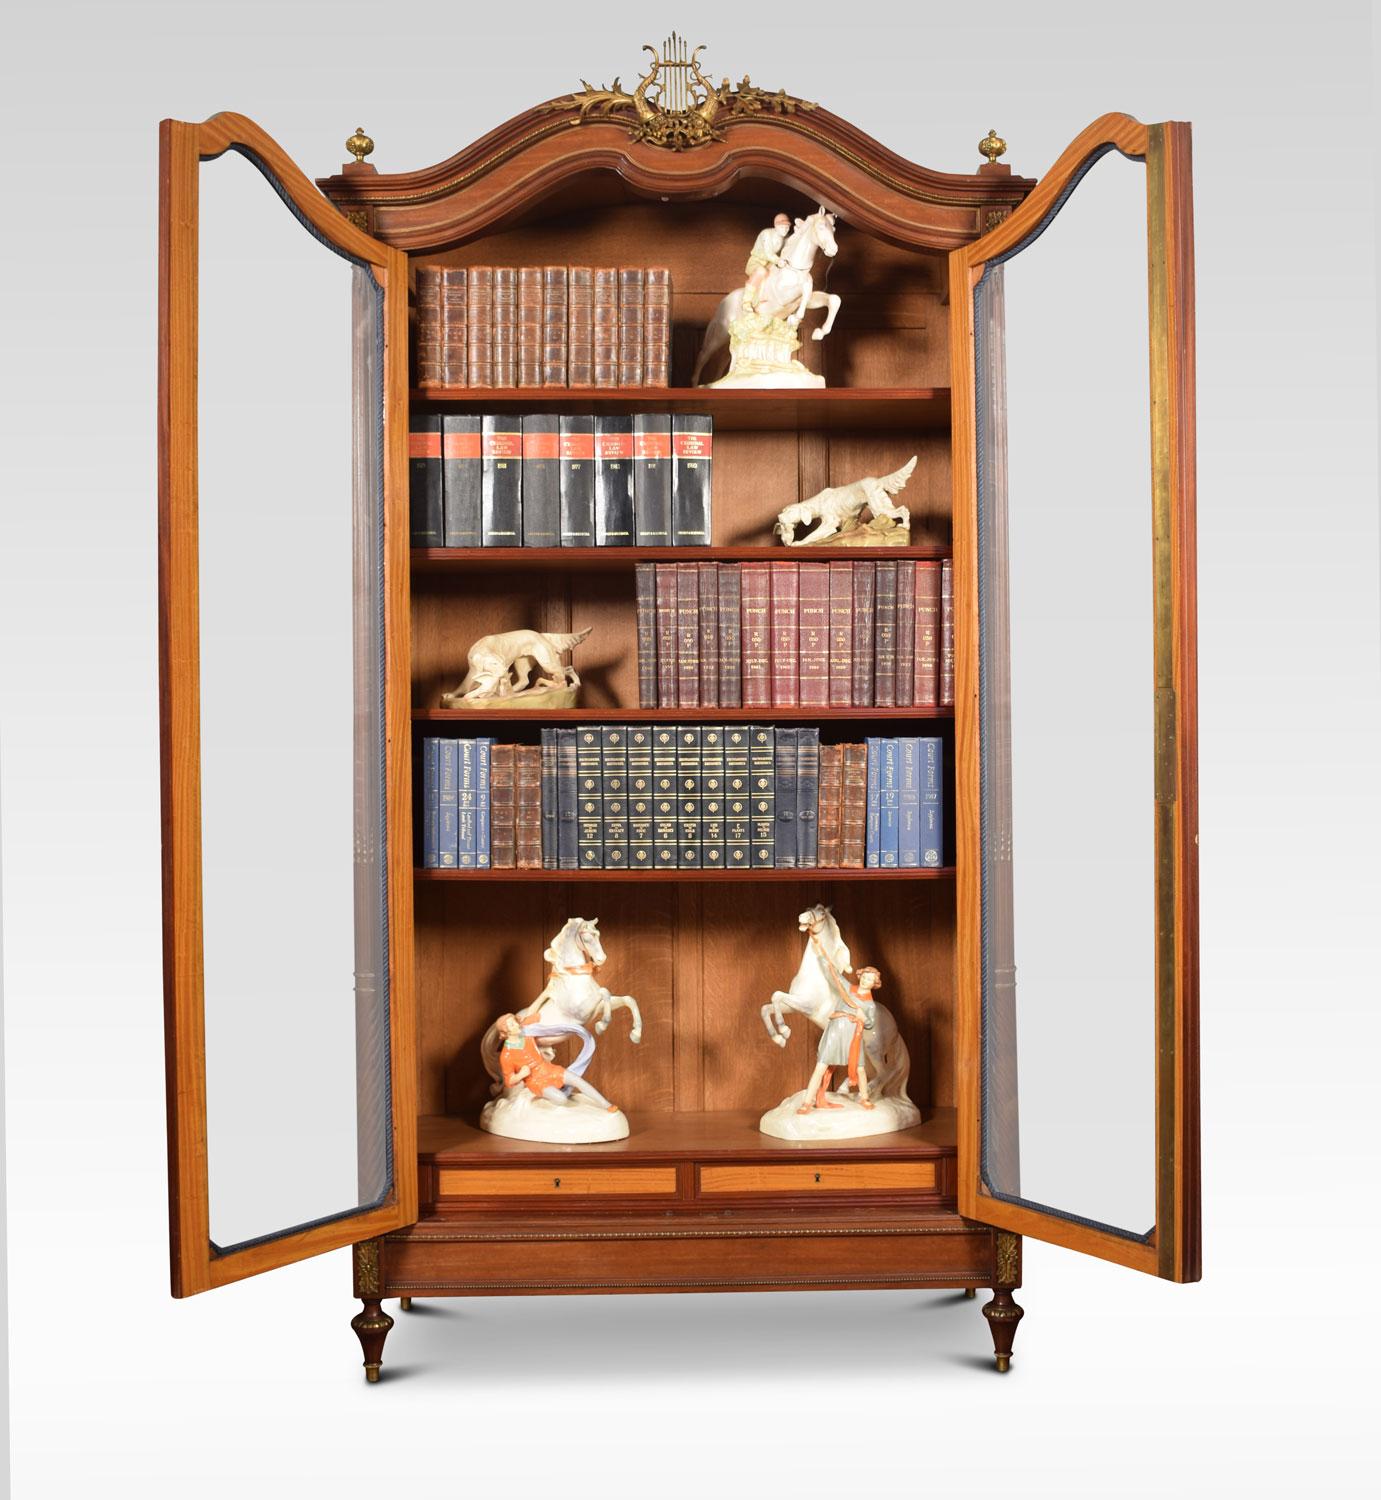 Late 19th century French mahogany bookcase .The moulded cornice with central lyre motif above two large bevelled glass doors enclosing four adjustable shelves with two short draws below. All raised up on tapering brass caped feet. The bookcase will